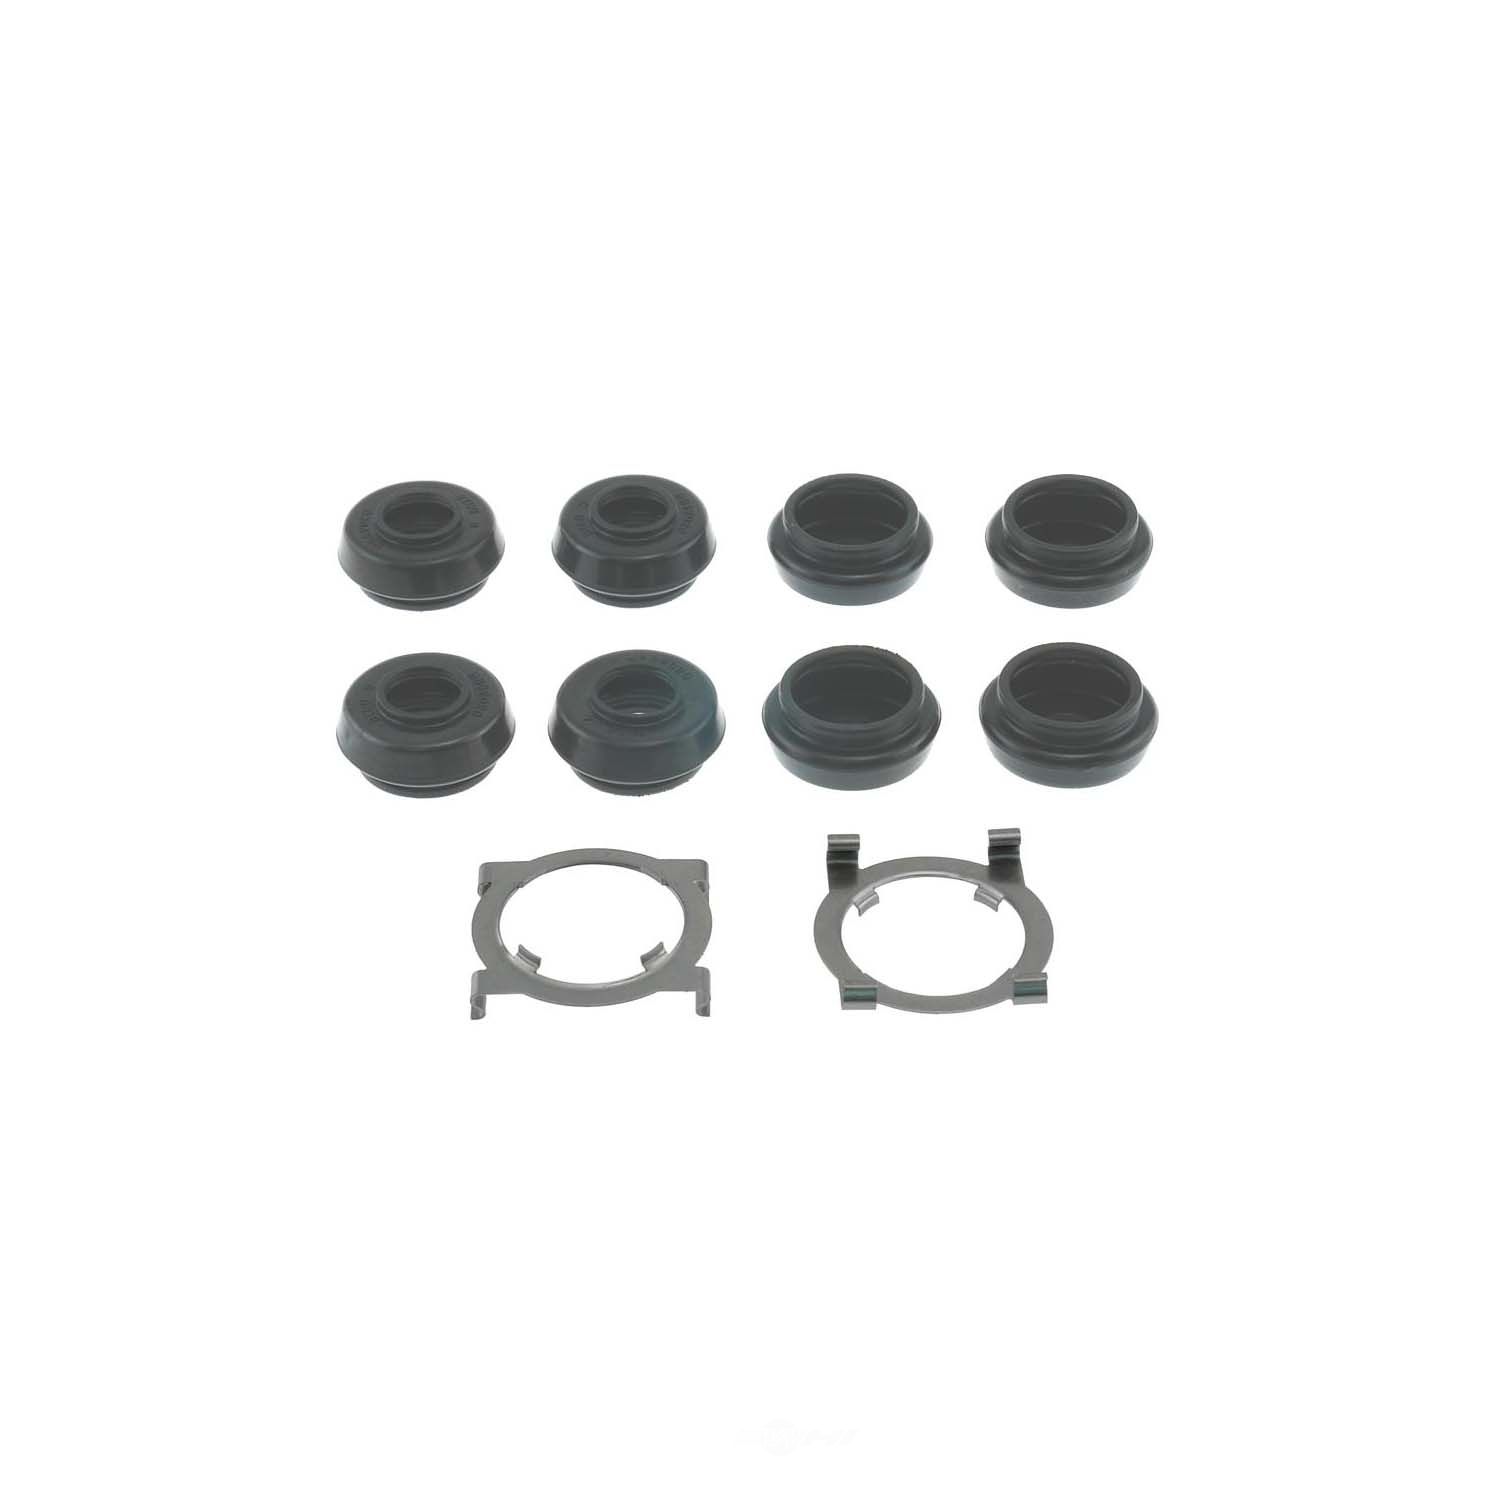 CARLSON QUALITY BRAKE PARTS - Includes Clips & Bushings - CRL H5587